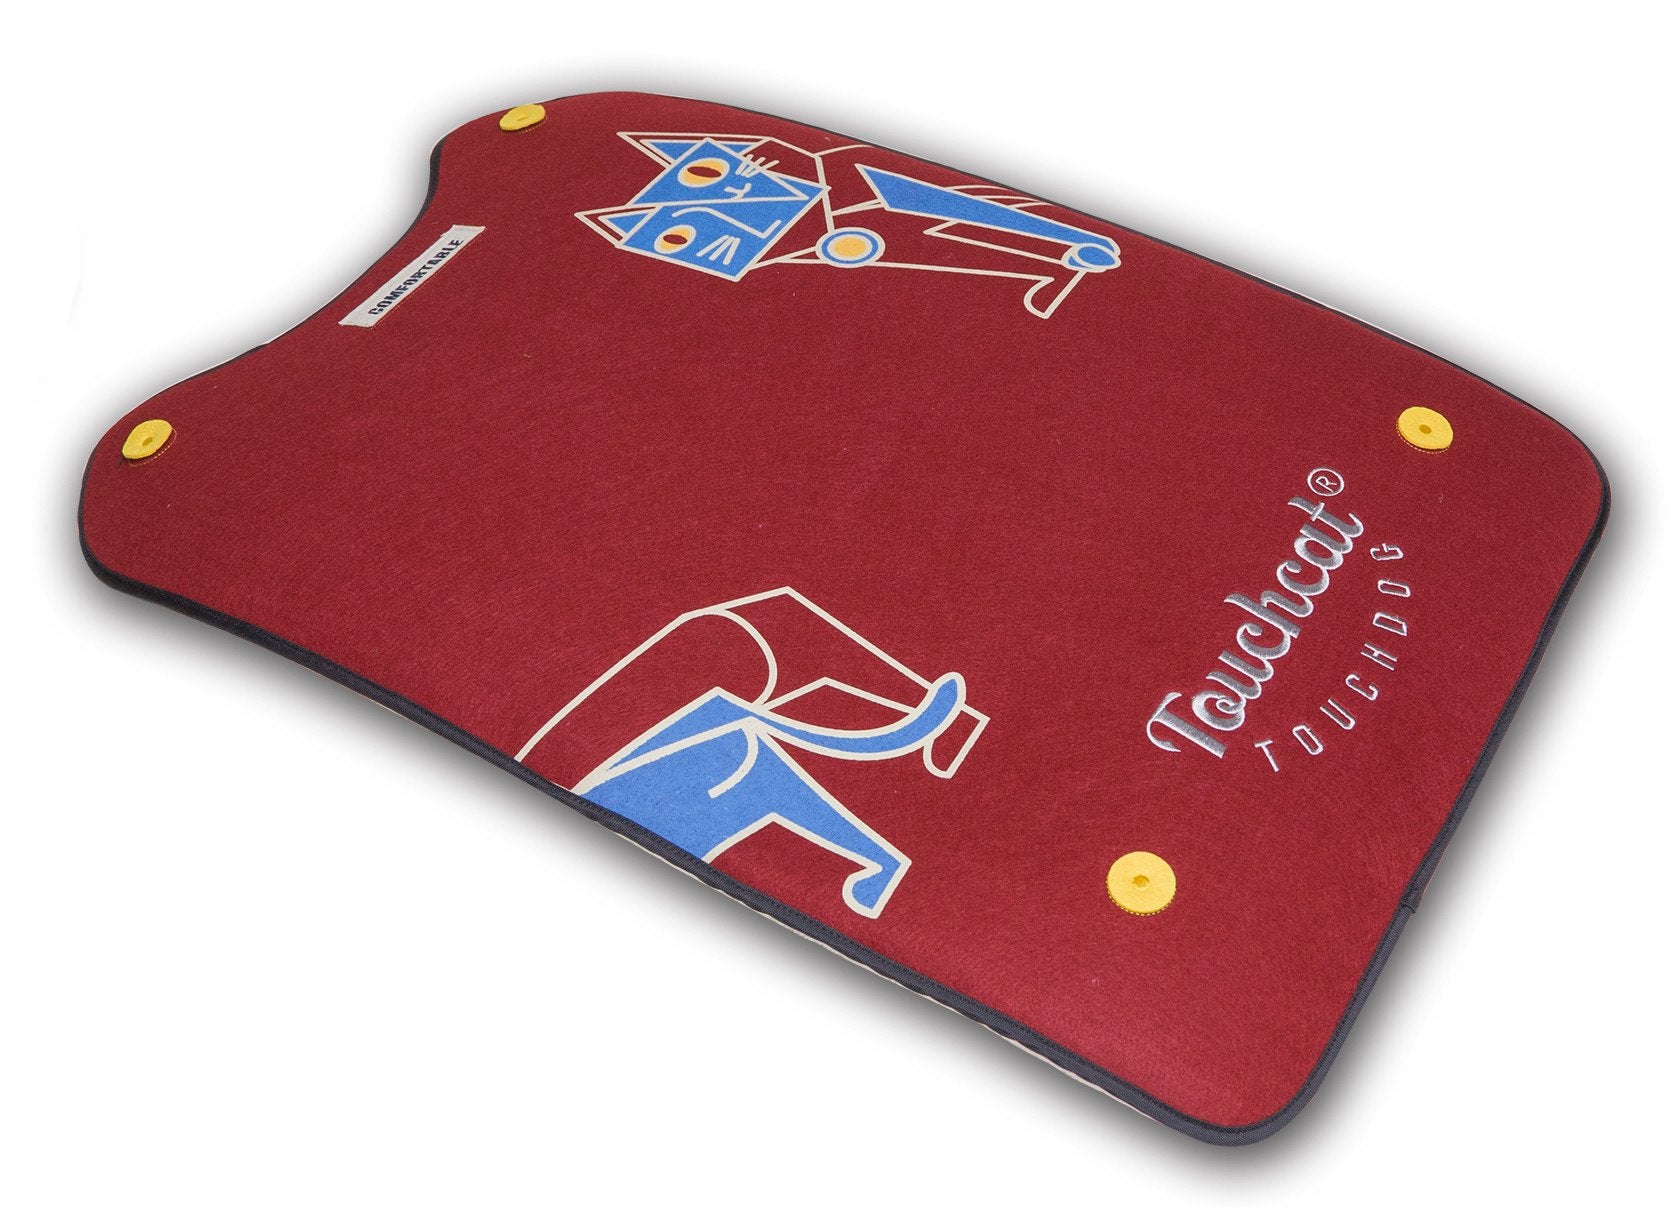 Touchcat Lamaste Travel Embroidered Pet Bed Mat - Red - Large